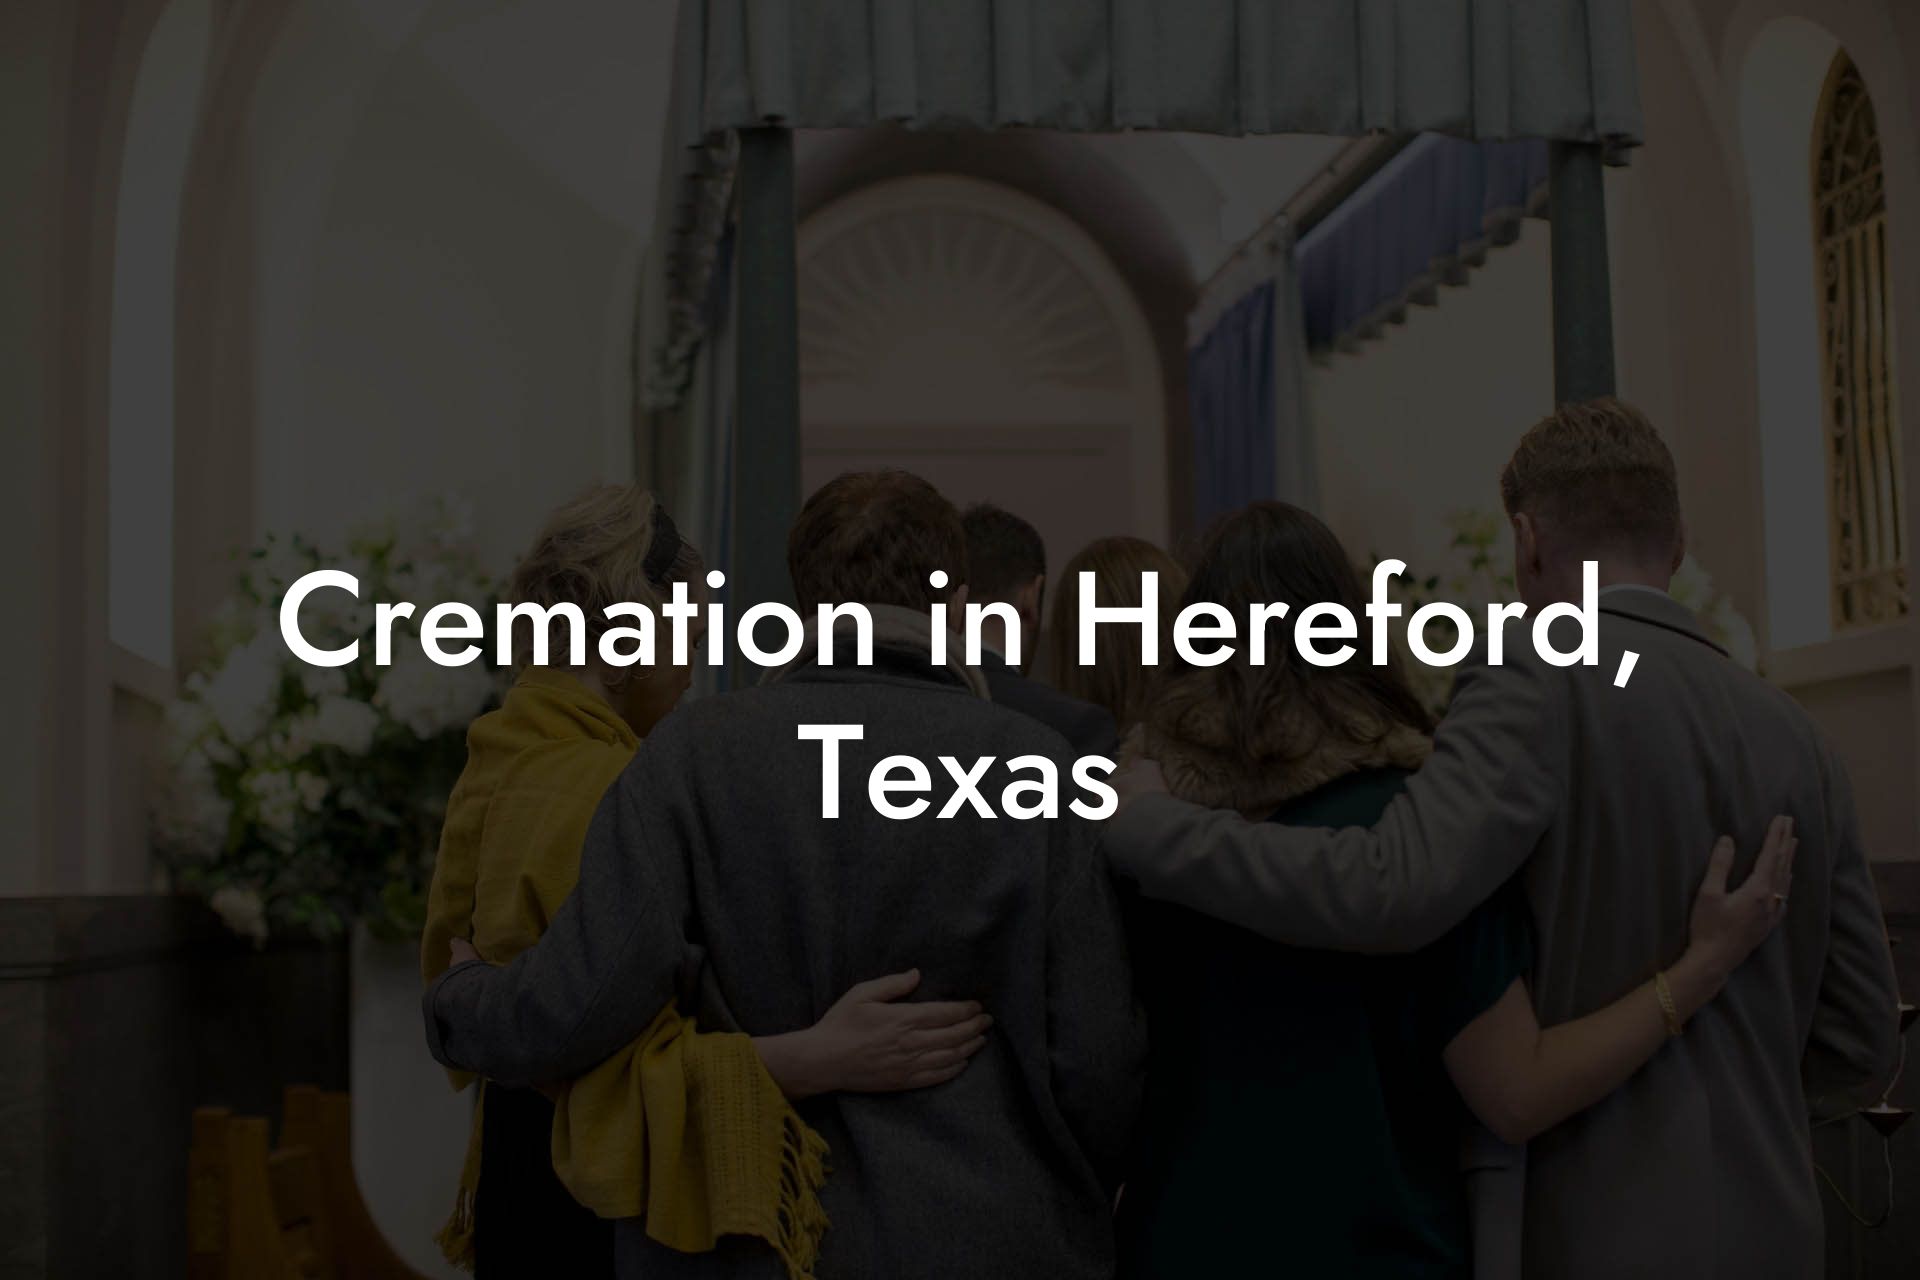 Cremation in Hereford, Texas